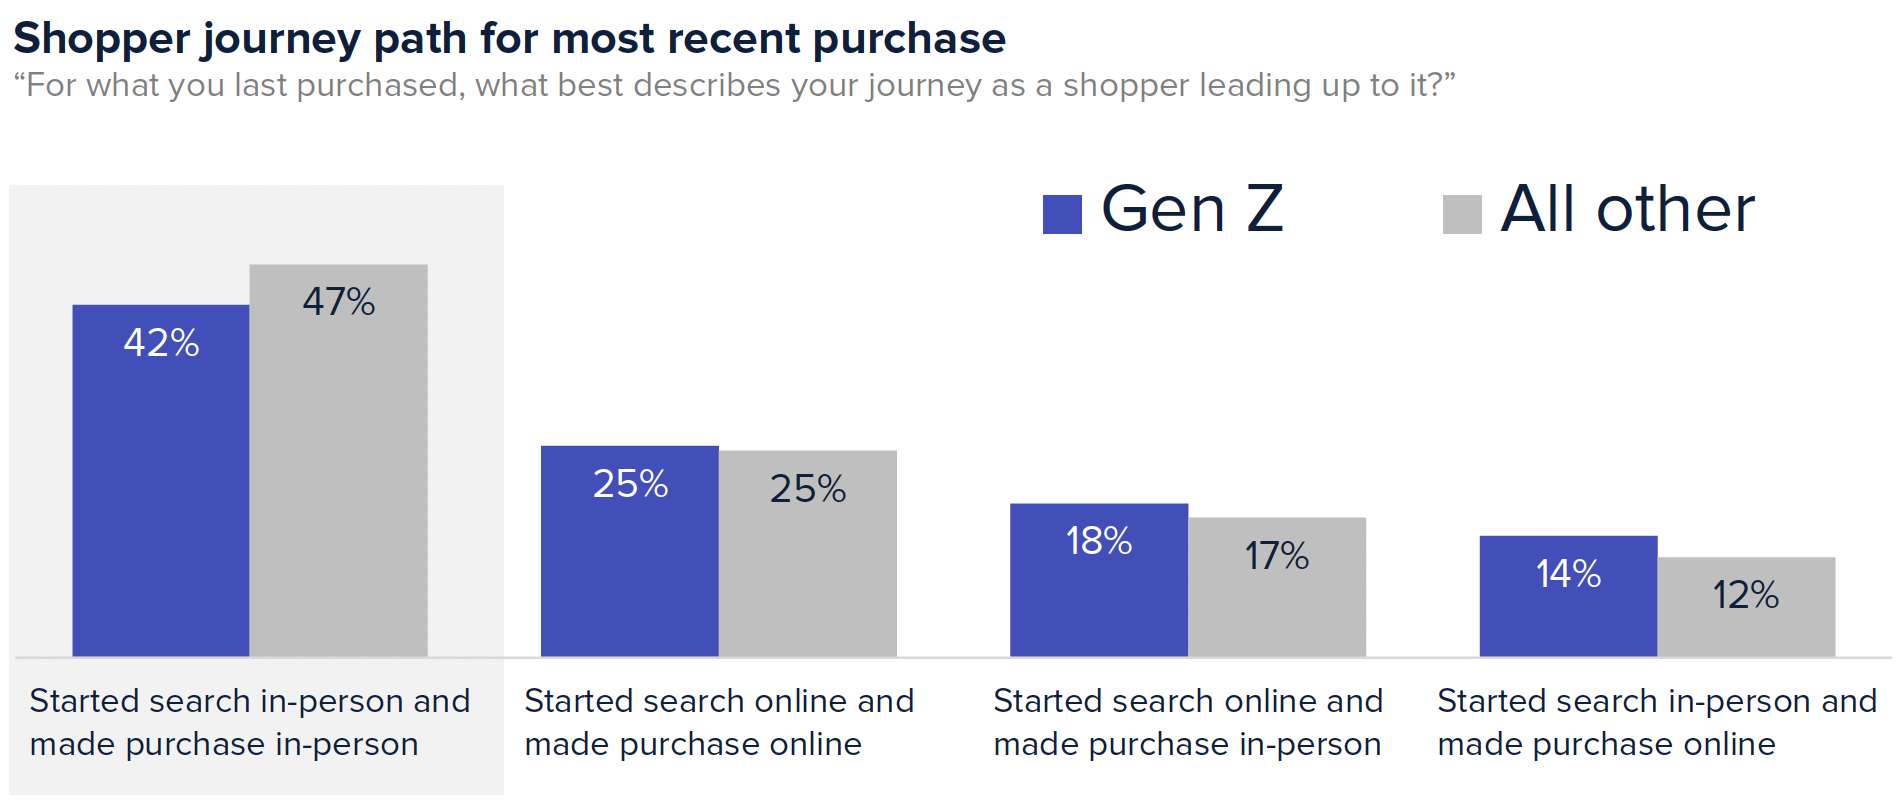 Shopper journey path for most recent purchase. For their last purchase, 42% of Gen Z started their search in-person and made the purchase in-person. 25% started their search online and made the purchase online. 18% started their search online and made the purchase in-person. 14% started their search in-person and made the purchase online.